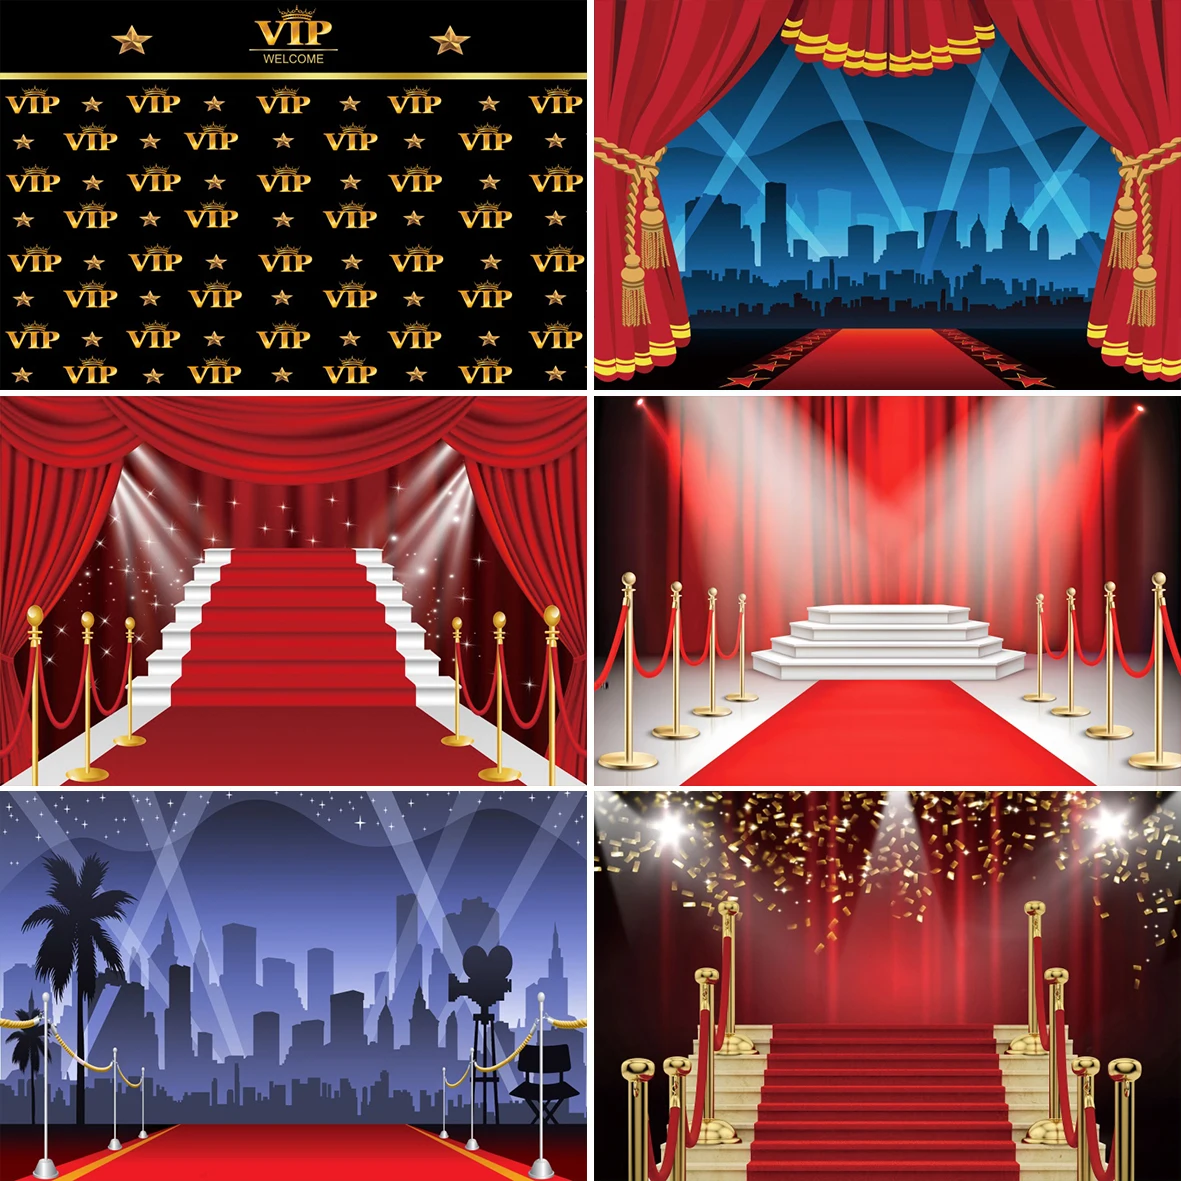 Laeacco Stage Backdrop Photography Red Carpet VIP Party Gold Polka Dots Family Portrait Photo Background Photocall Photo Studio